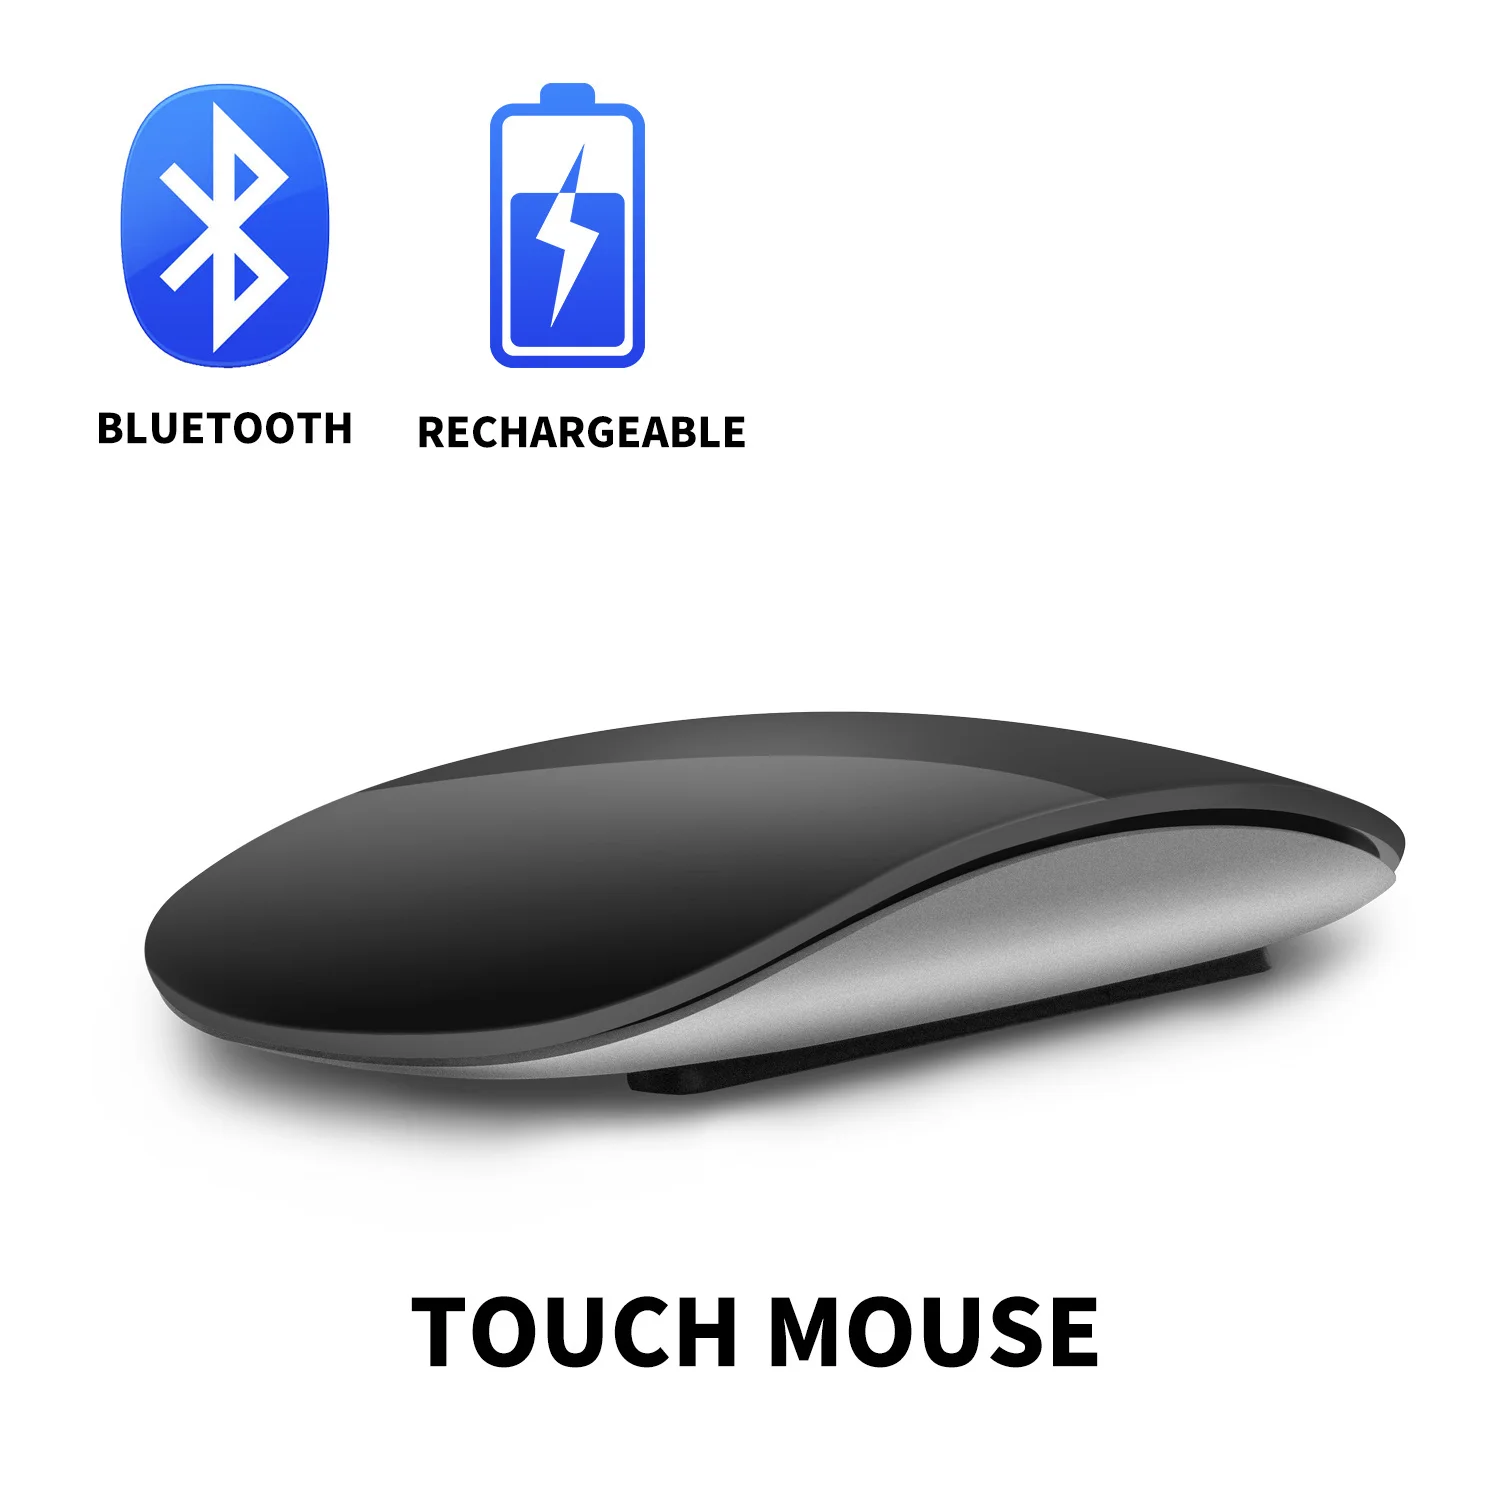 

2023 New Arrivals Wireless Bluetooth Magic 2 PC Gamer Mouse Noiseless Rechargeable Laser Ergonomic Design Touch For Asus Laptop